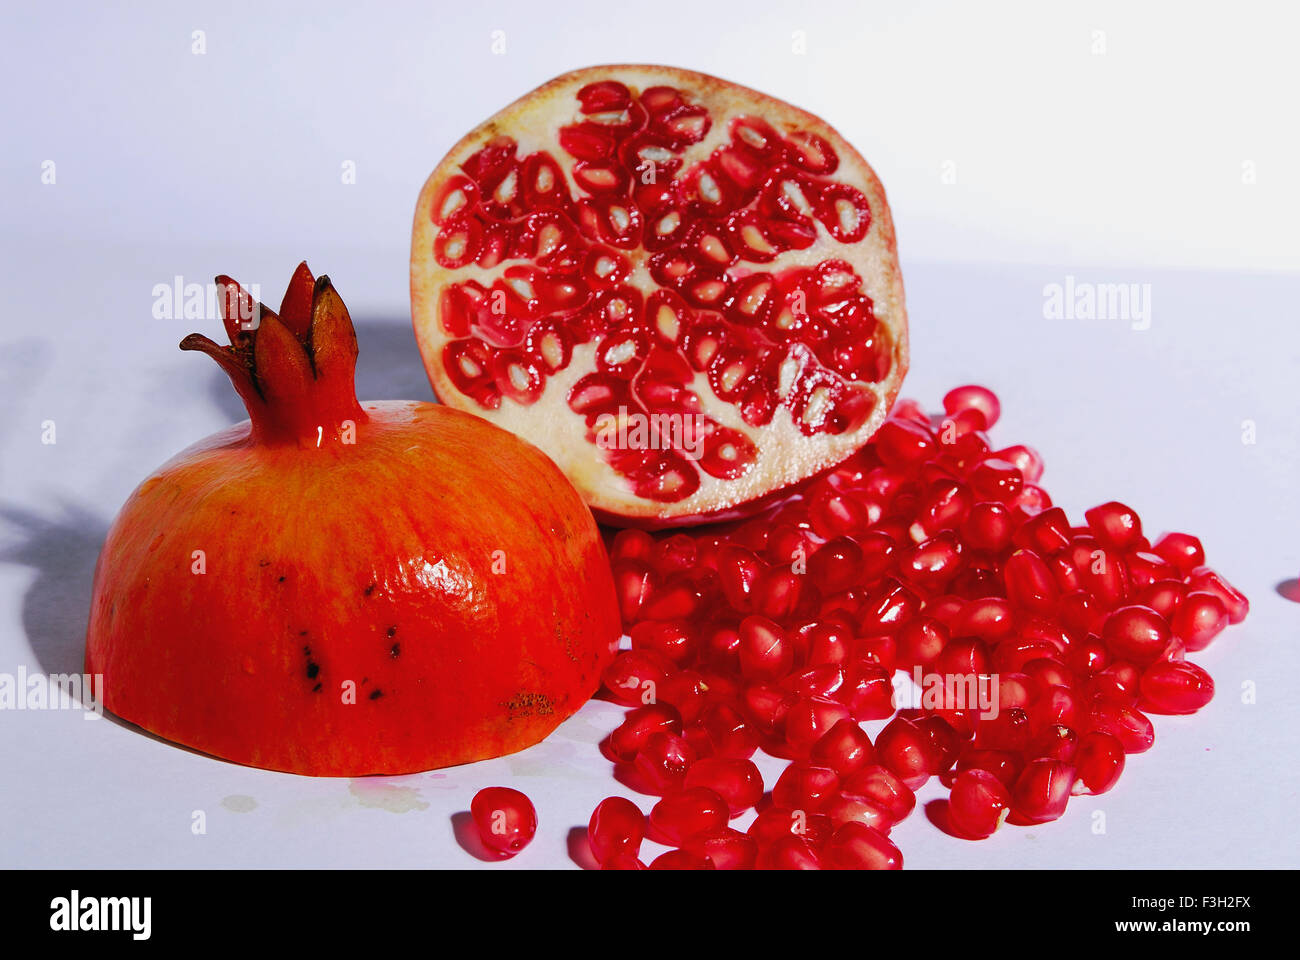 Fruits ; one cut Pomegranate with seeds on white background Stock Photo